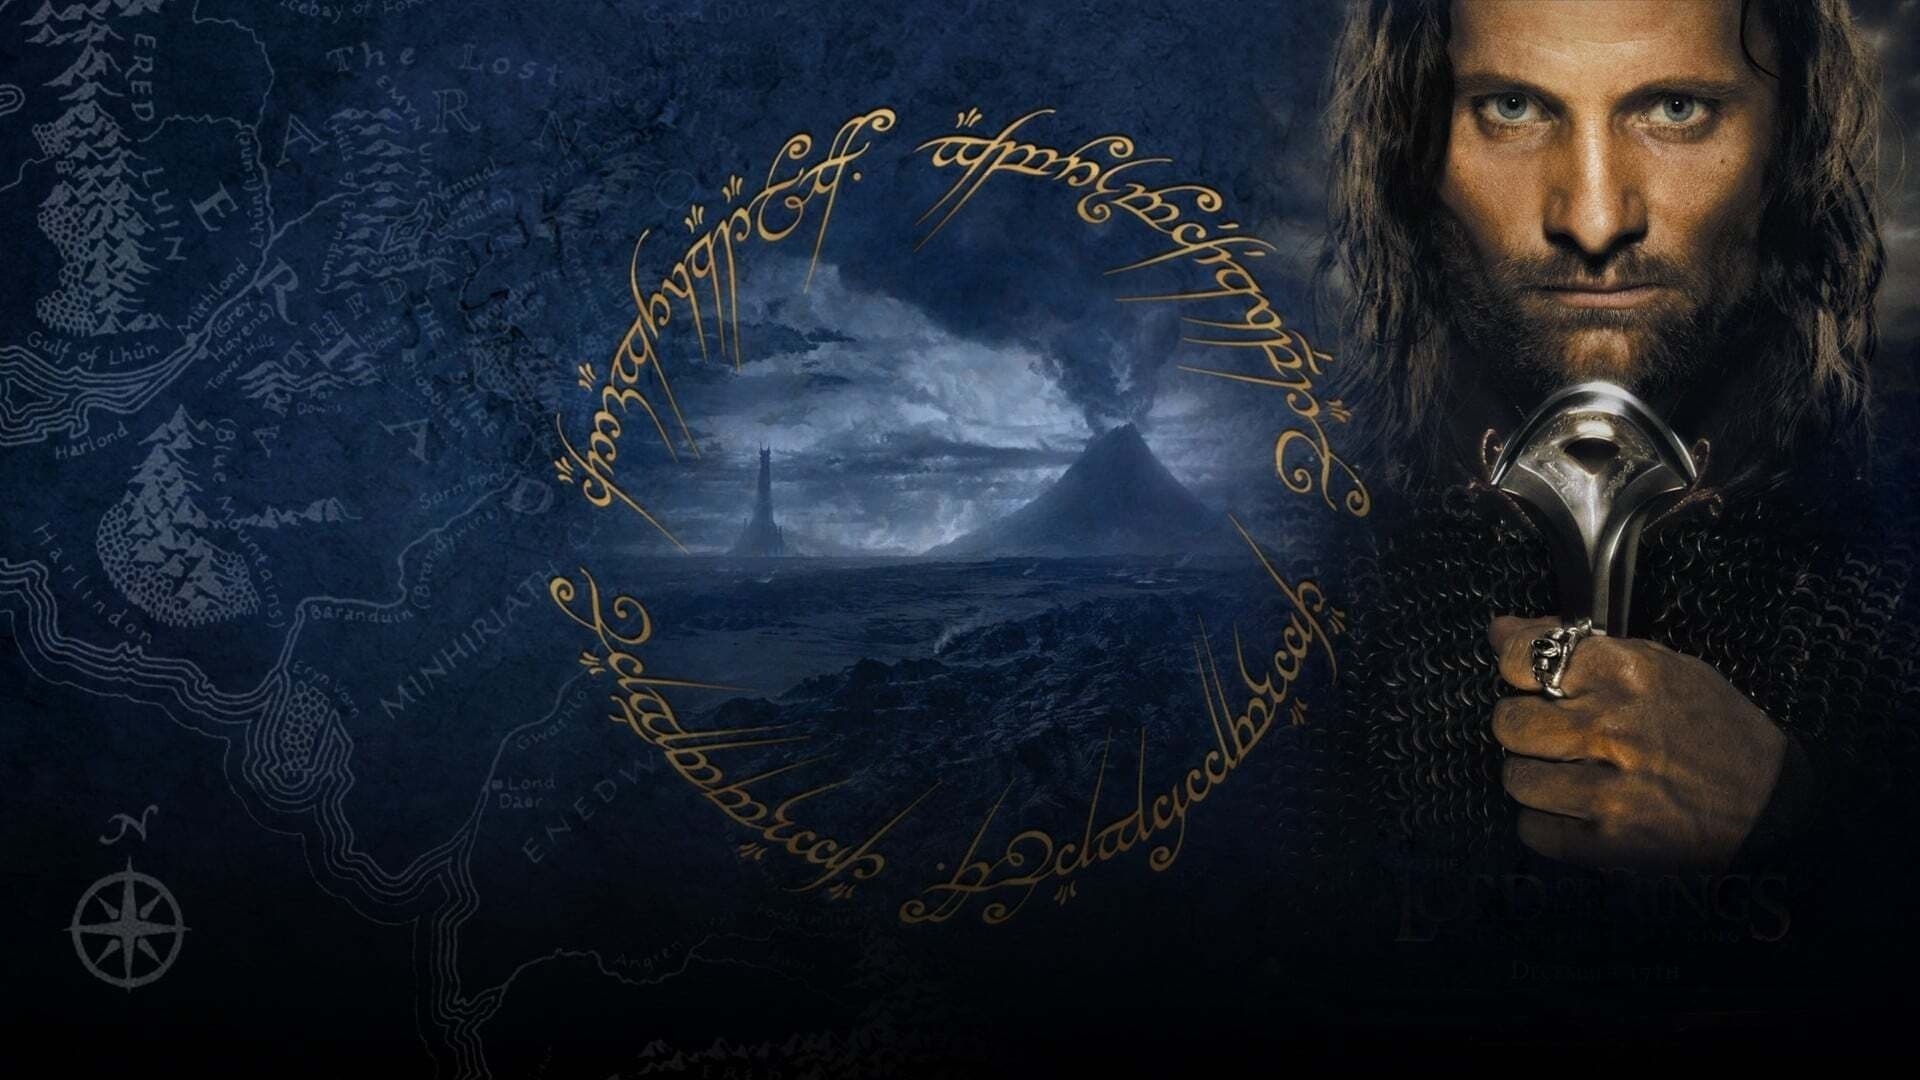 The Return of the King: The final installment in The Lord of the Rings trilogy. 1920x1080 Full HD Wallpaper.